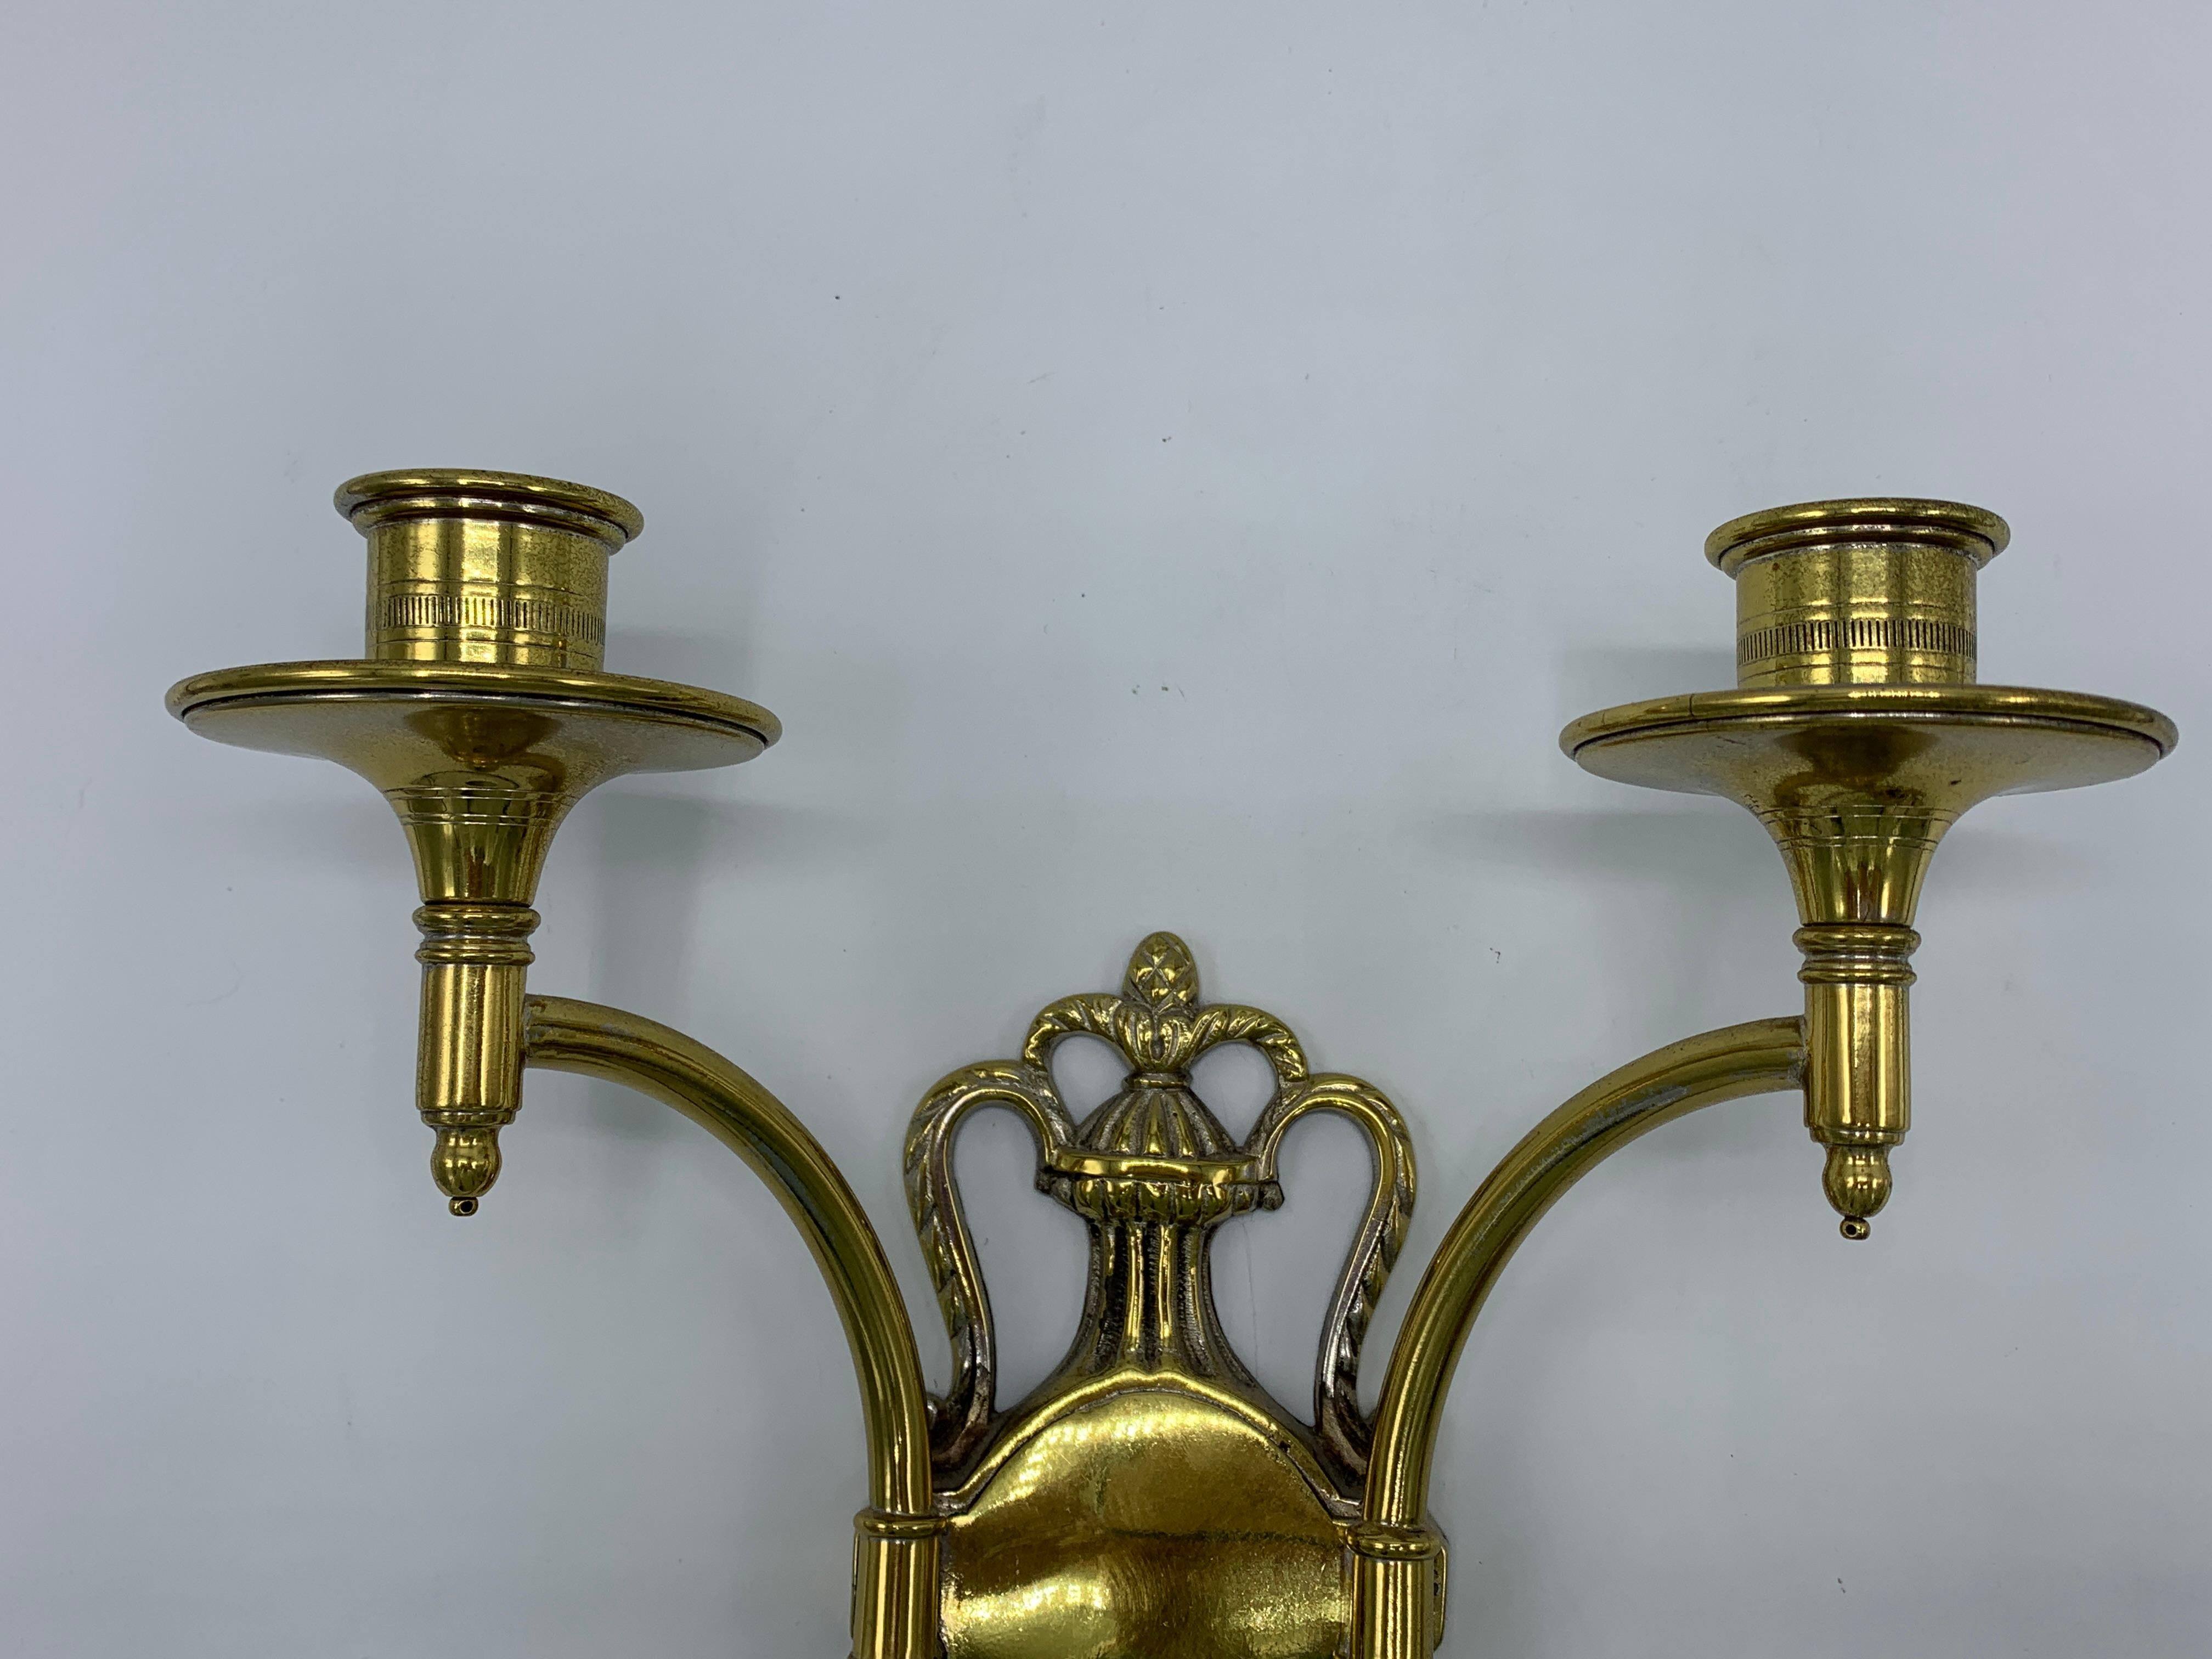 Offered is a pair of 1960s, polished brass shield/crest shaped candlestick wall sconces. Heavy. Marked on backside, 